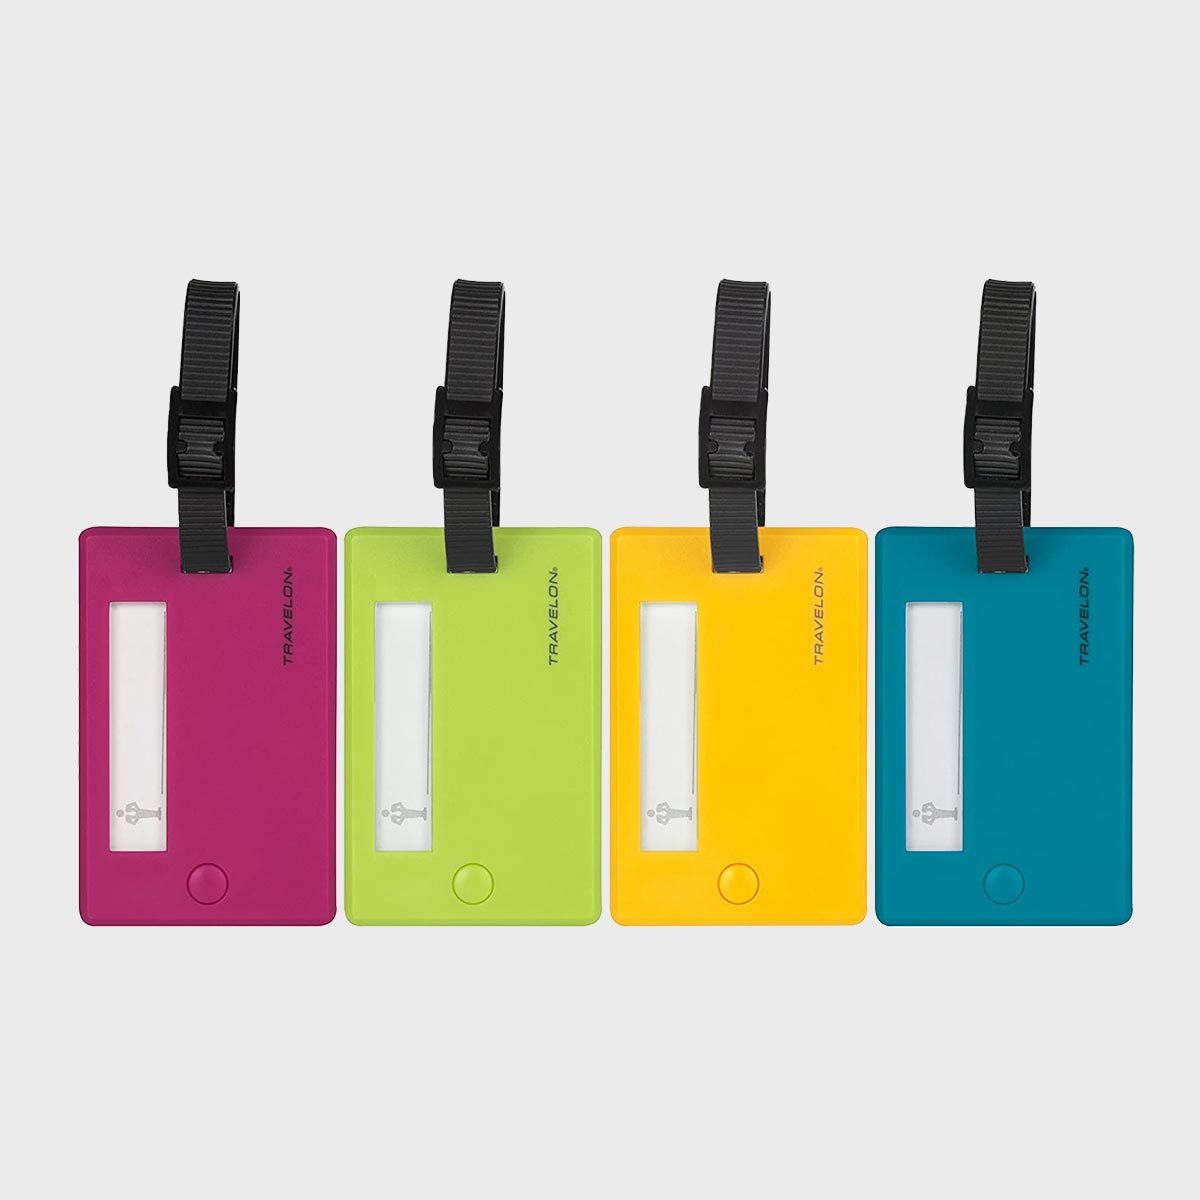 <p>At first glance, a passerby would only be able to see your name on these <a href="https://www.amazon.com/Travelon-Assorted-Color-Luggage-Tags/dp/B01F5WR776" rel="noopener">Travelon tags</a>. Instead of putting personal information on display, these best luggage tags have a protective cover where your address, phone number and email are kept out of sight. For <a href="https://www.rd.com/article/holiday-travel-tips/">cautious travelers</a>, it certainly delivers some peace of mind.</p> <p class="listicle-page__cta-button-shop"><a class="shop-btn" href="https://www.amazon.com/Travelon-Assorted-Color-Luggage-Tags/dp/B01F5WR776">Shop Now</a></p>